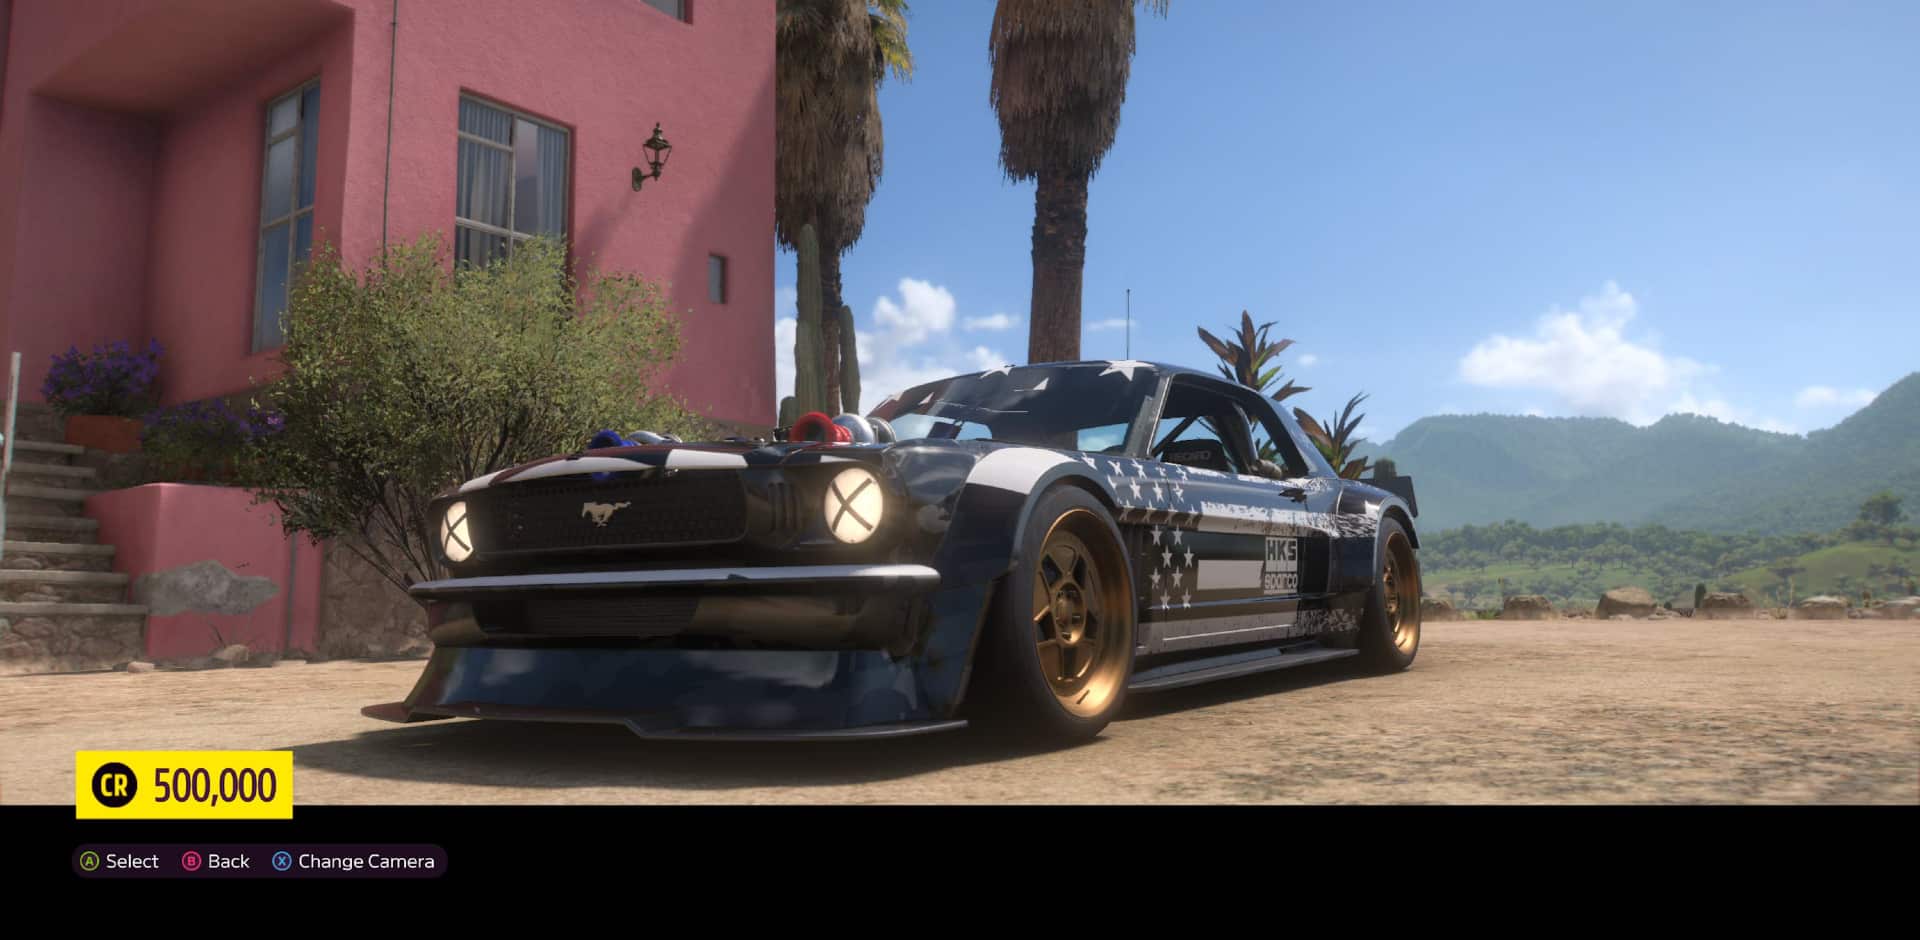 Ford Hoonicorn, one of the best rally cars, on display in FH5